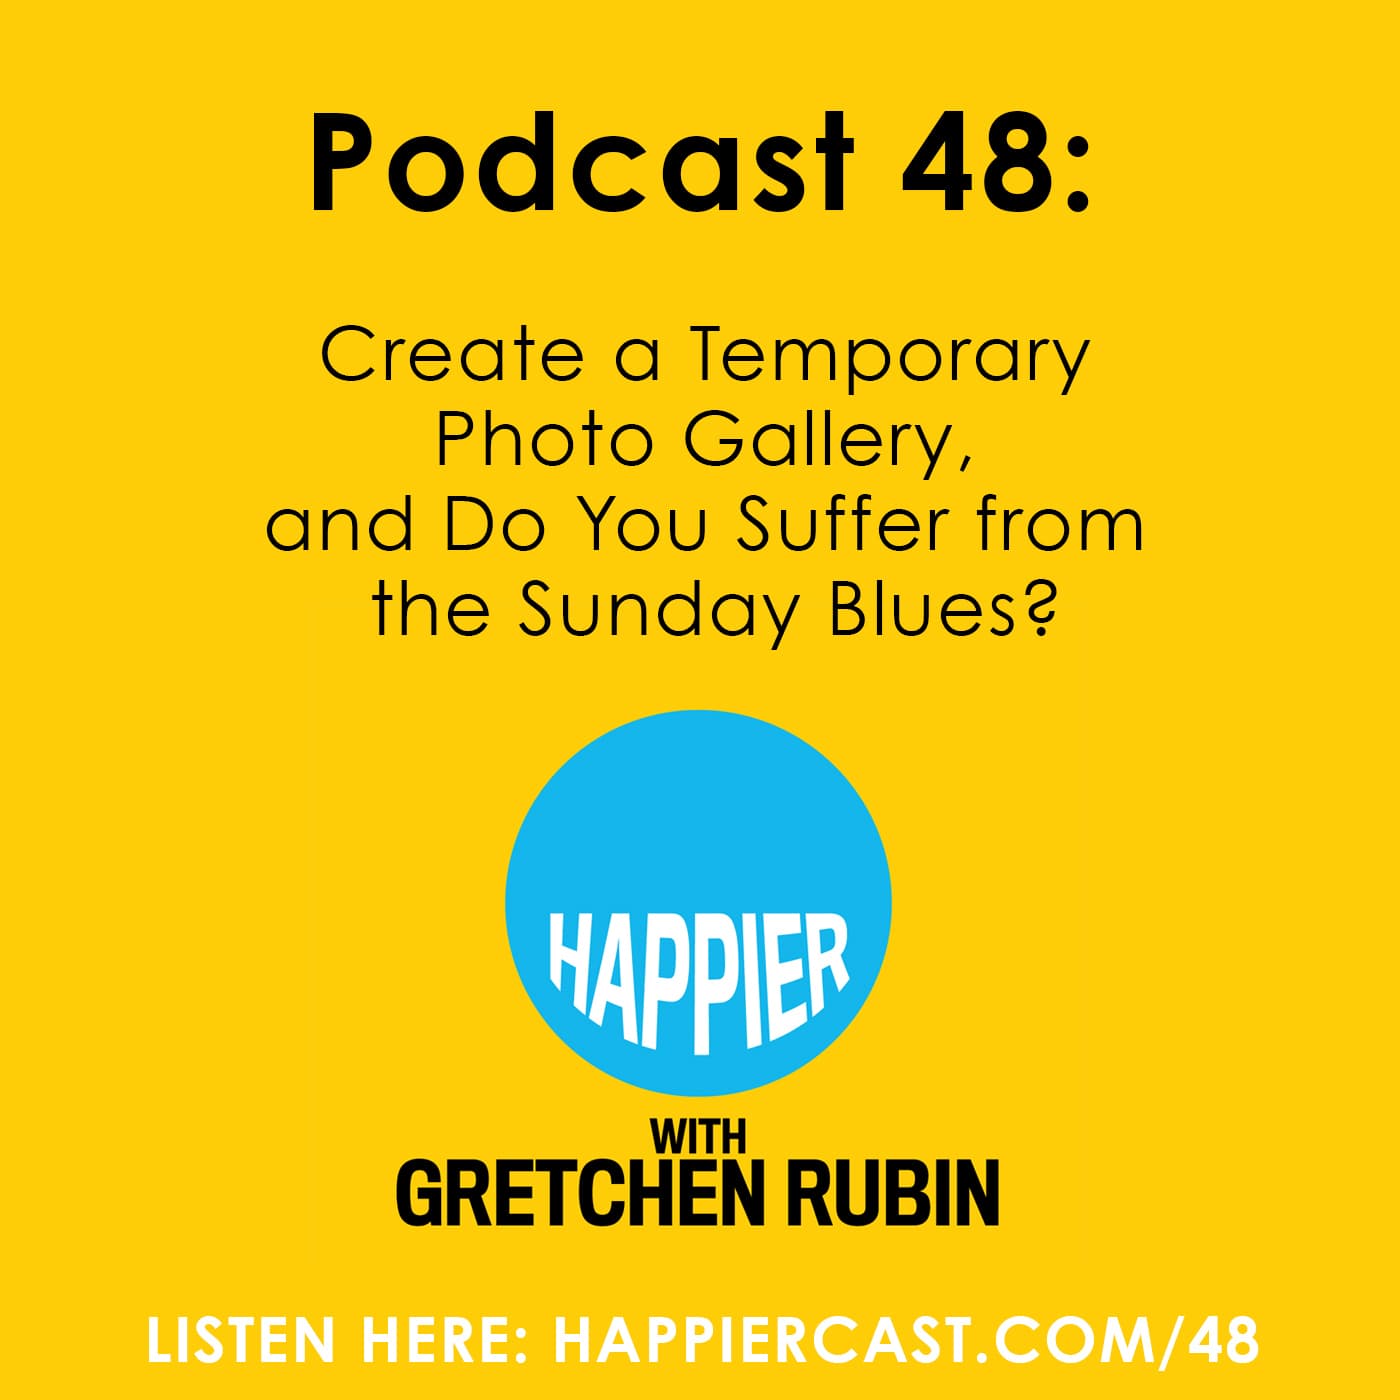 Happier with Gretchen Rubin - Listen to this episode at Happiercast.com/48